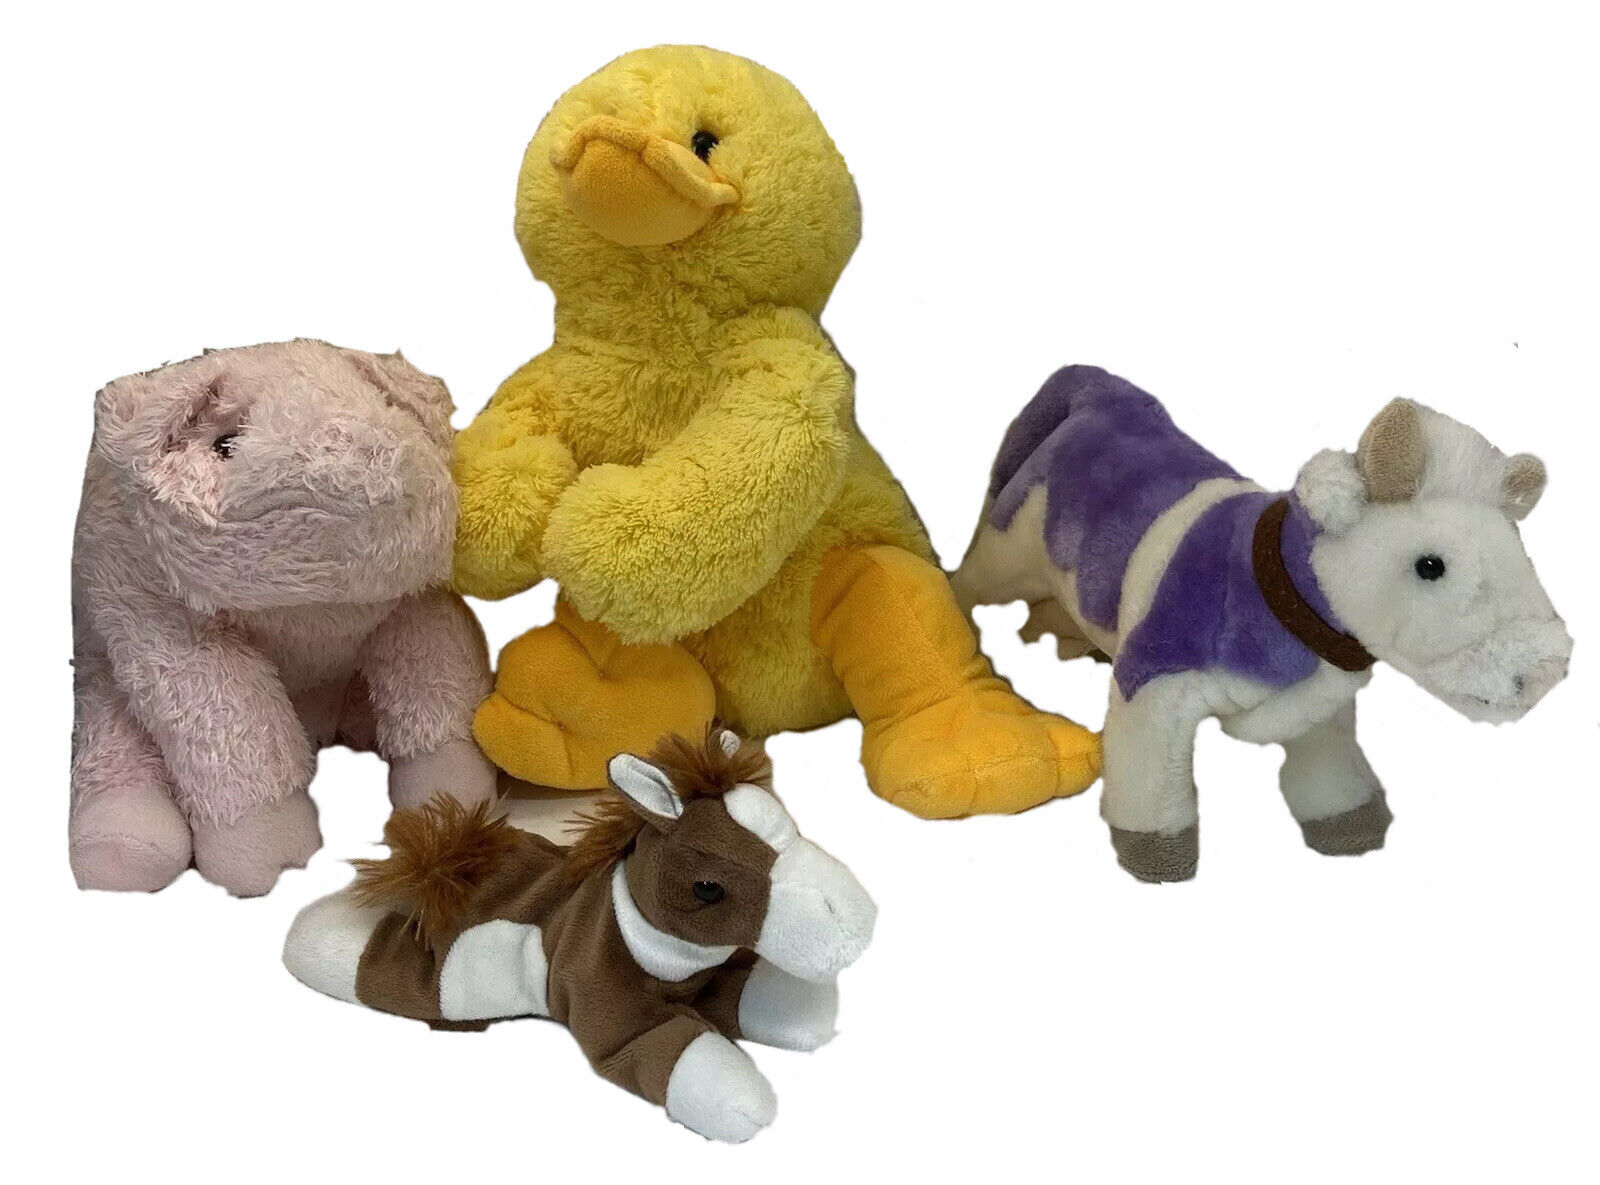 NWOT Farm Animals Plush Lot of 4 Yellow Duck, Pig, Horse & Cow Fast Shipping!